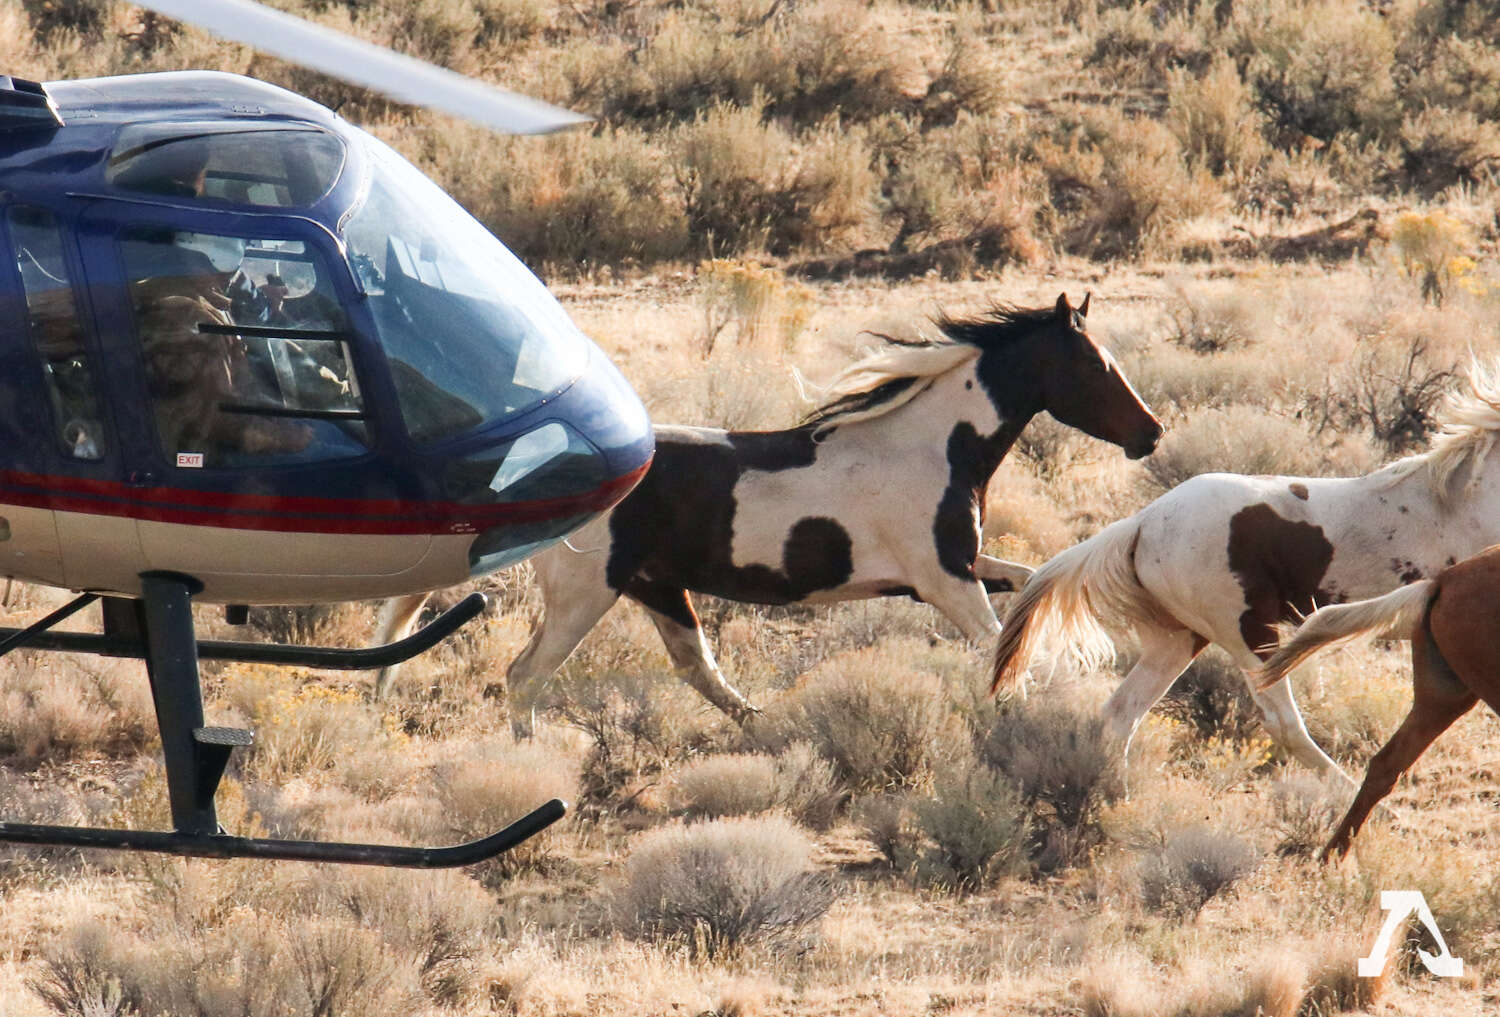 Wild horses being rounded up by the BLM